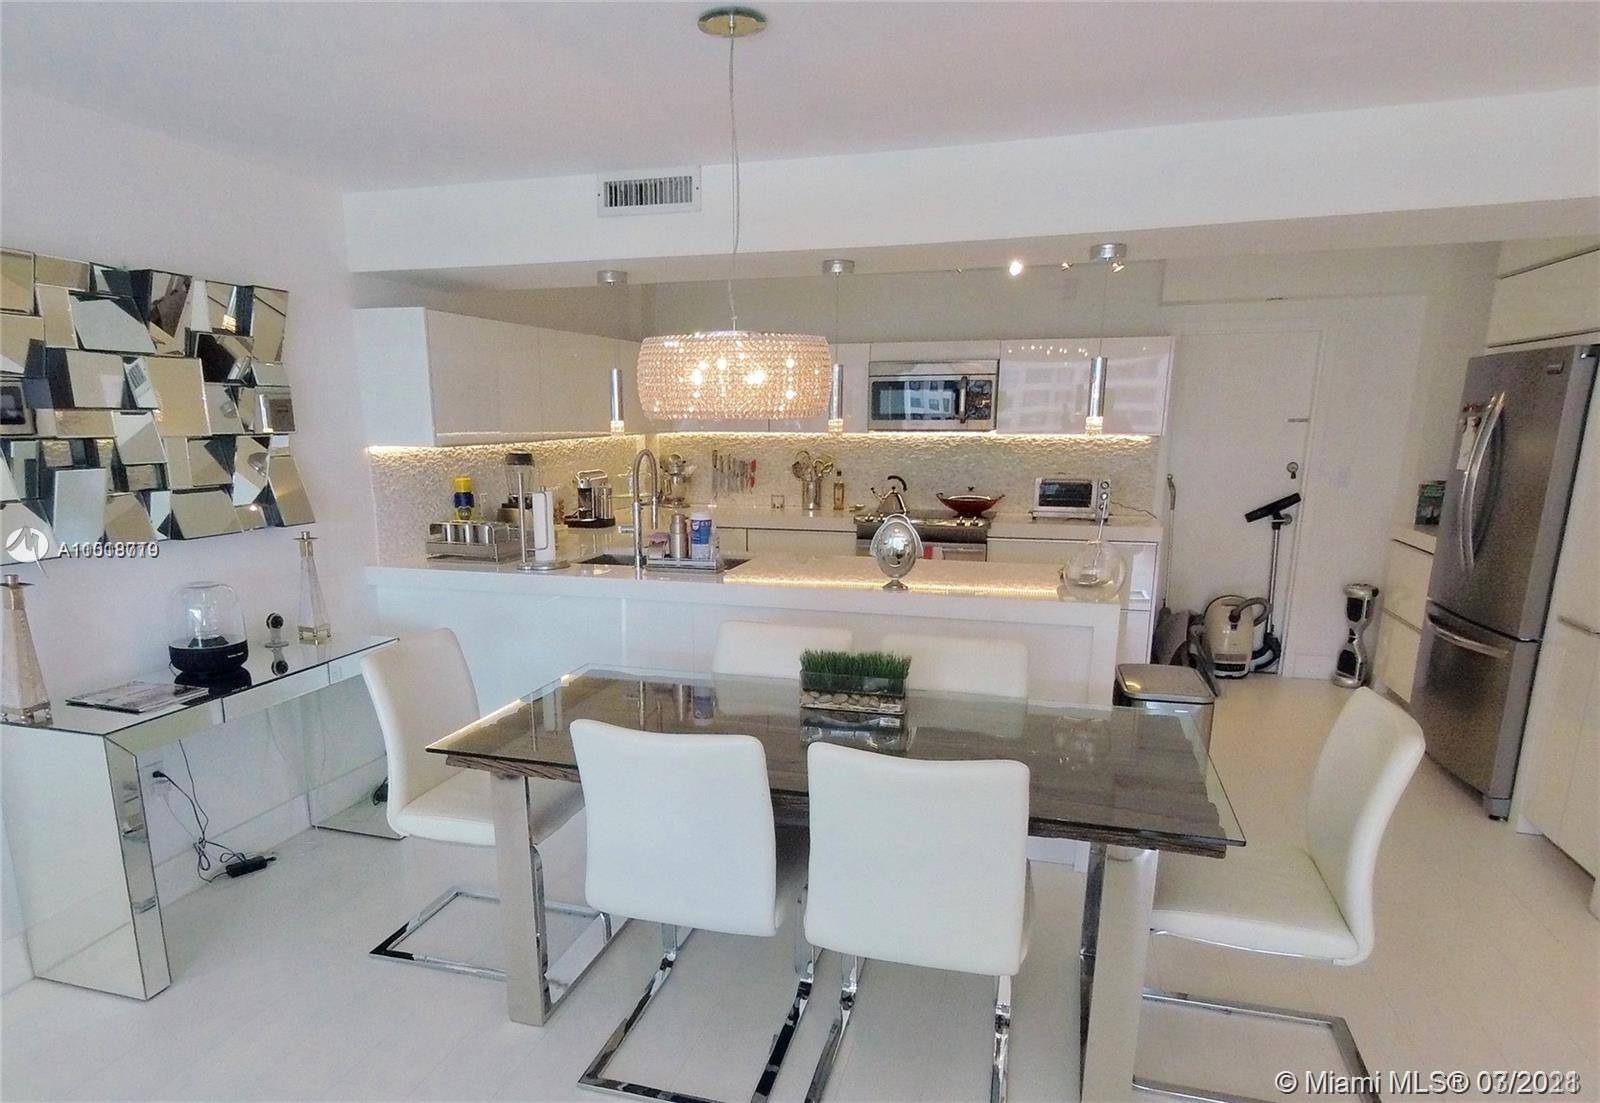 Spectacularly remodeled 2 bedroom 2 bath south side Commodore Club South apartment.